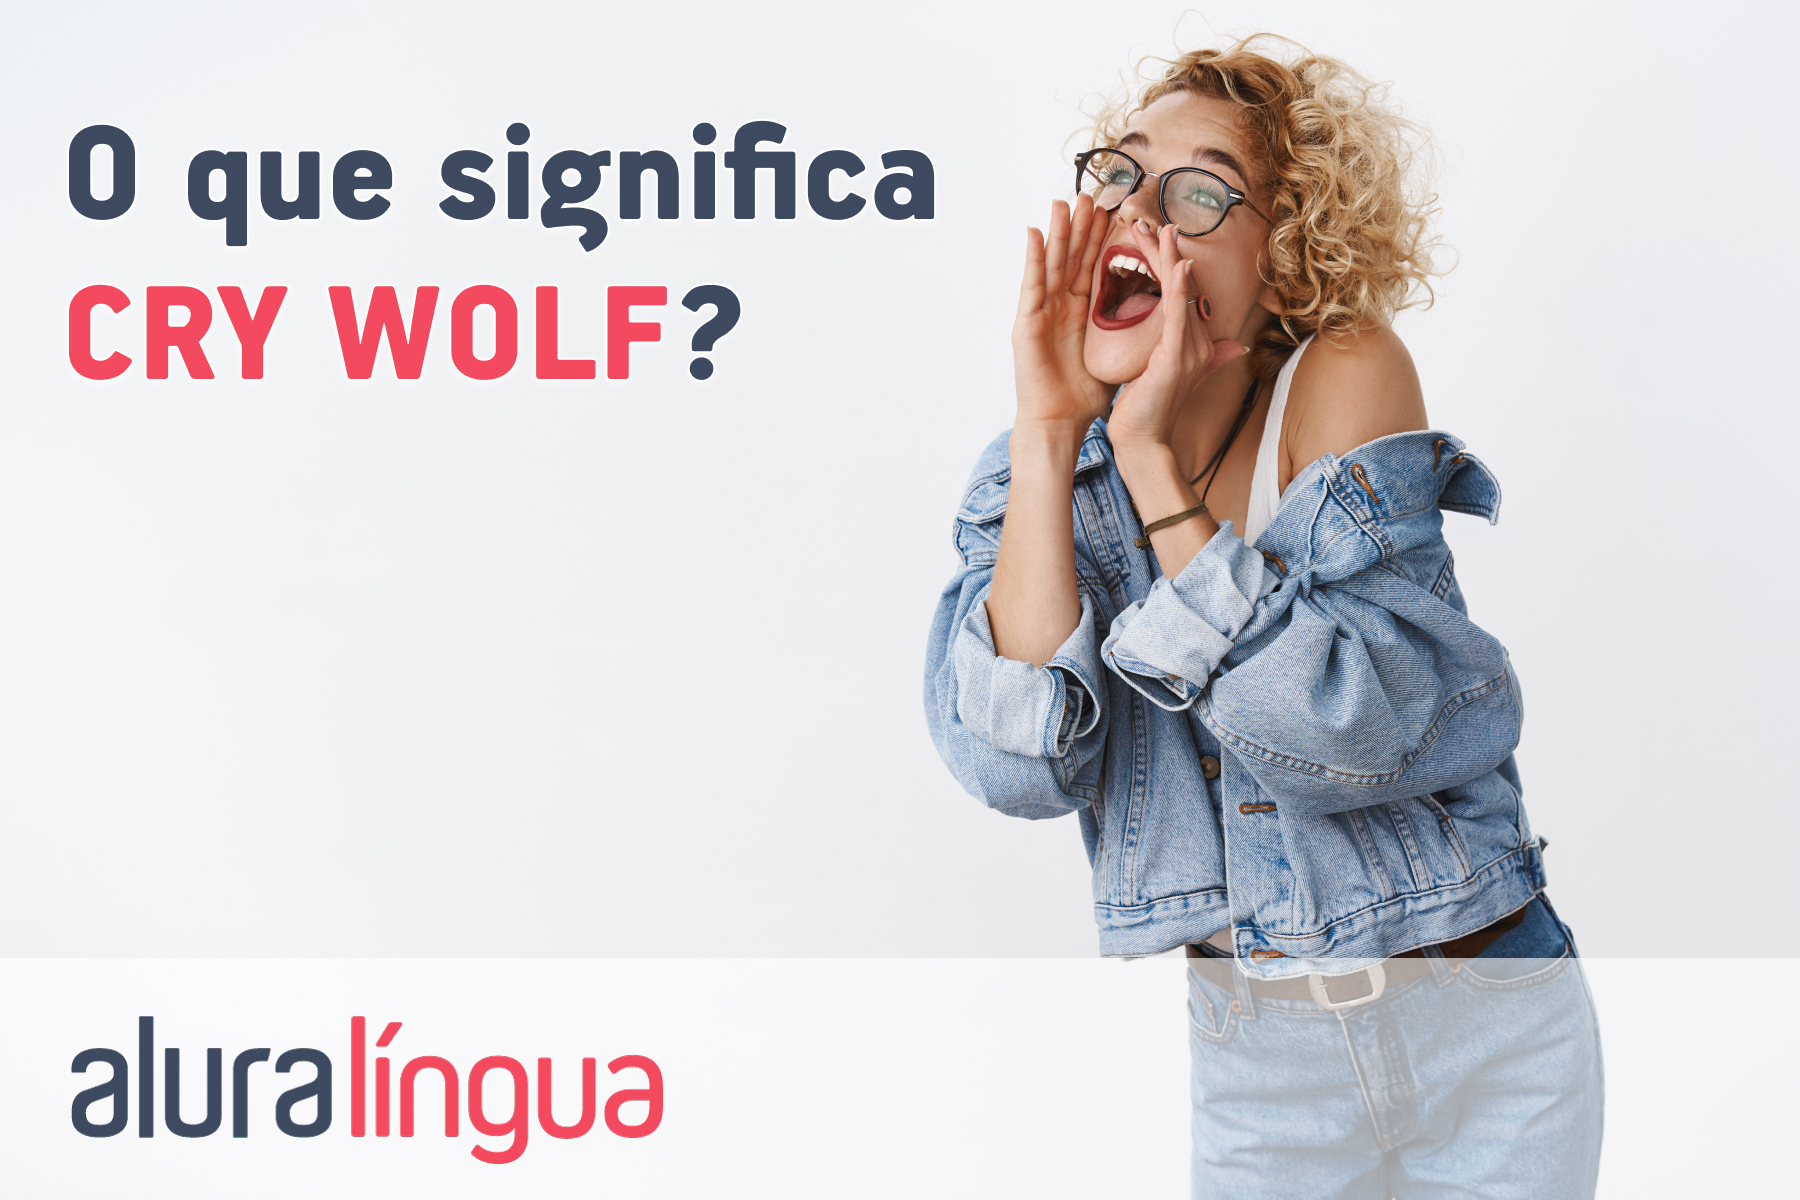 O que significa cry wolf #inset